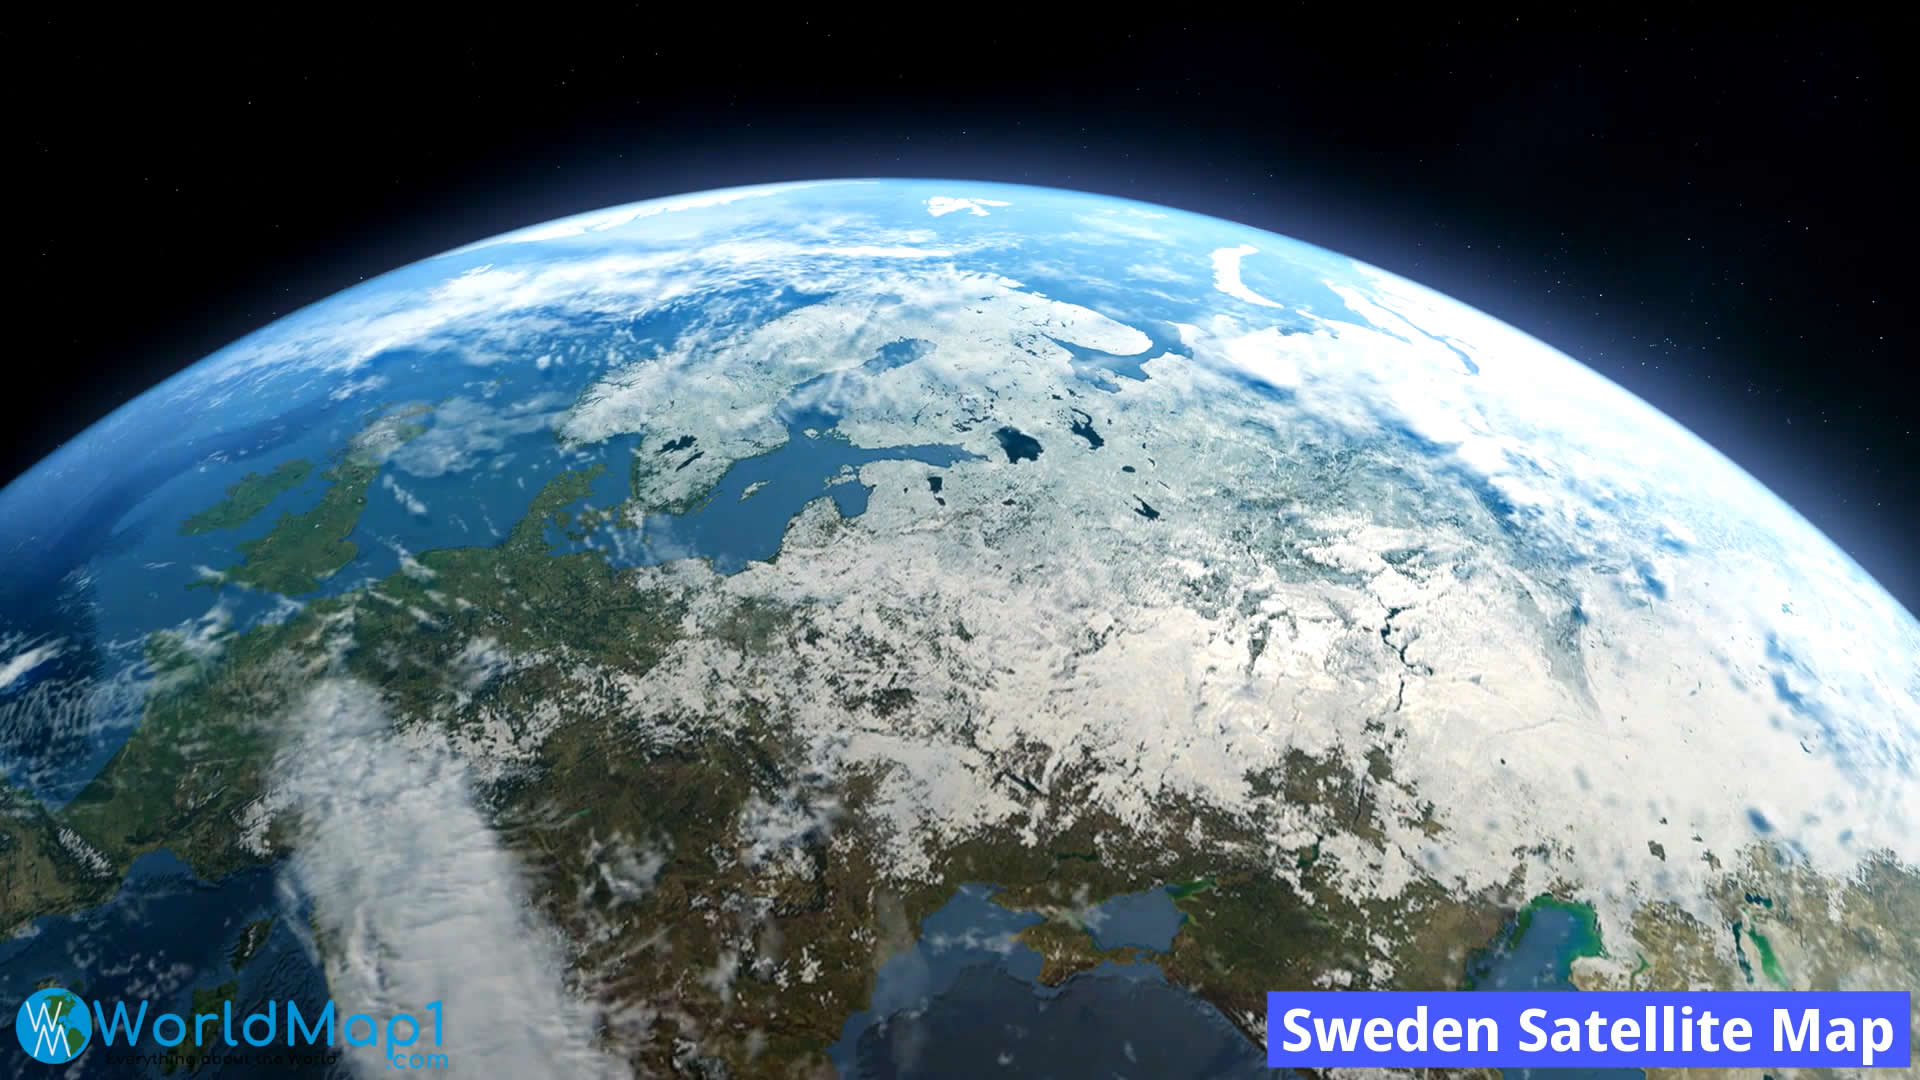 Sweden Satellite Map from Space